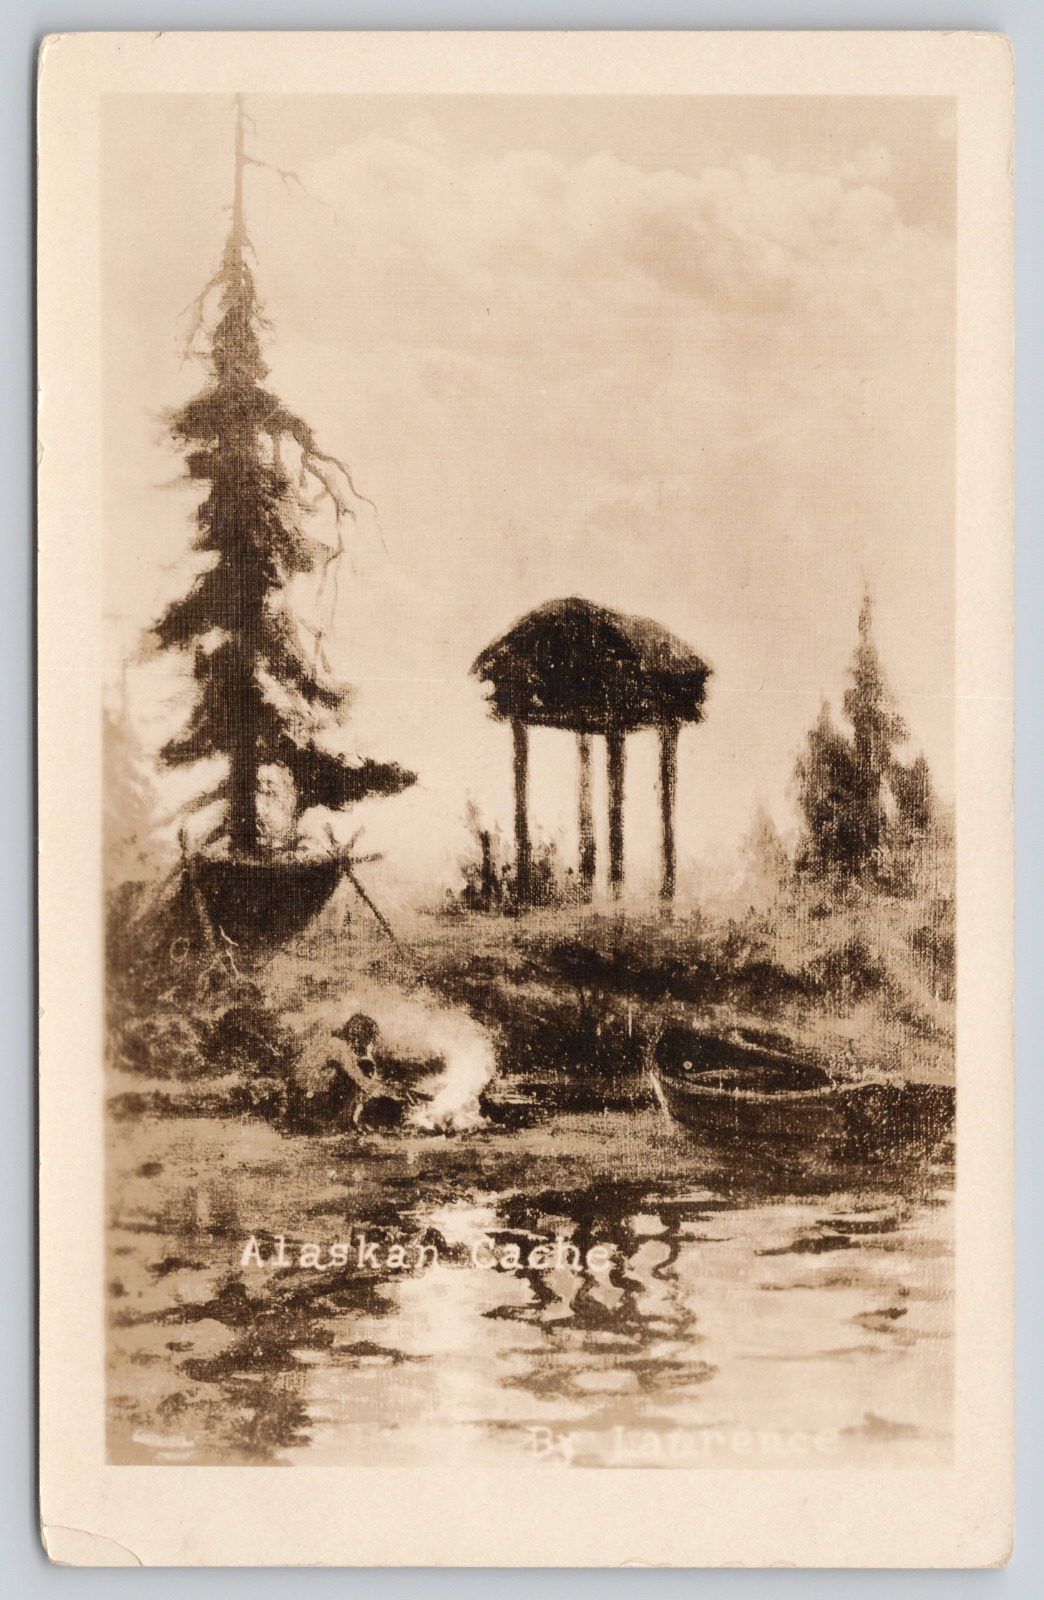 RPPC Alaskan Cache Photo by Laurence A216